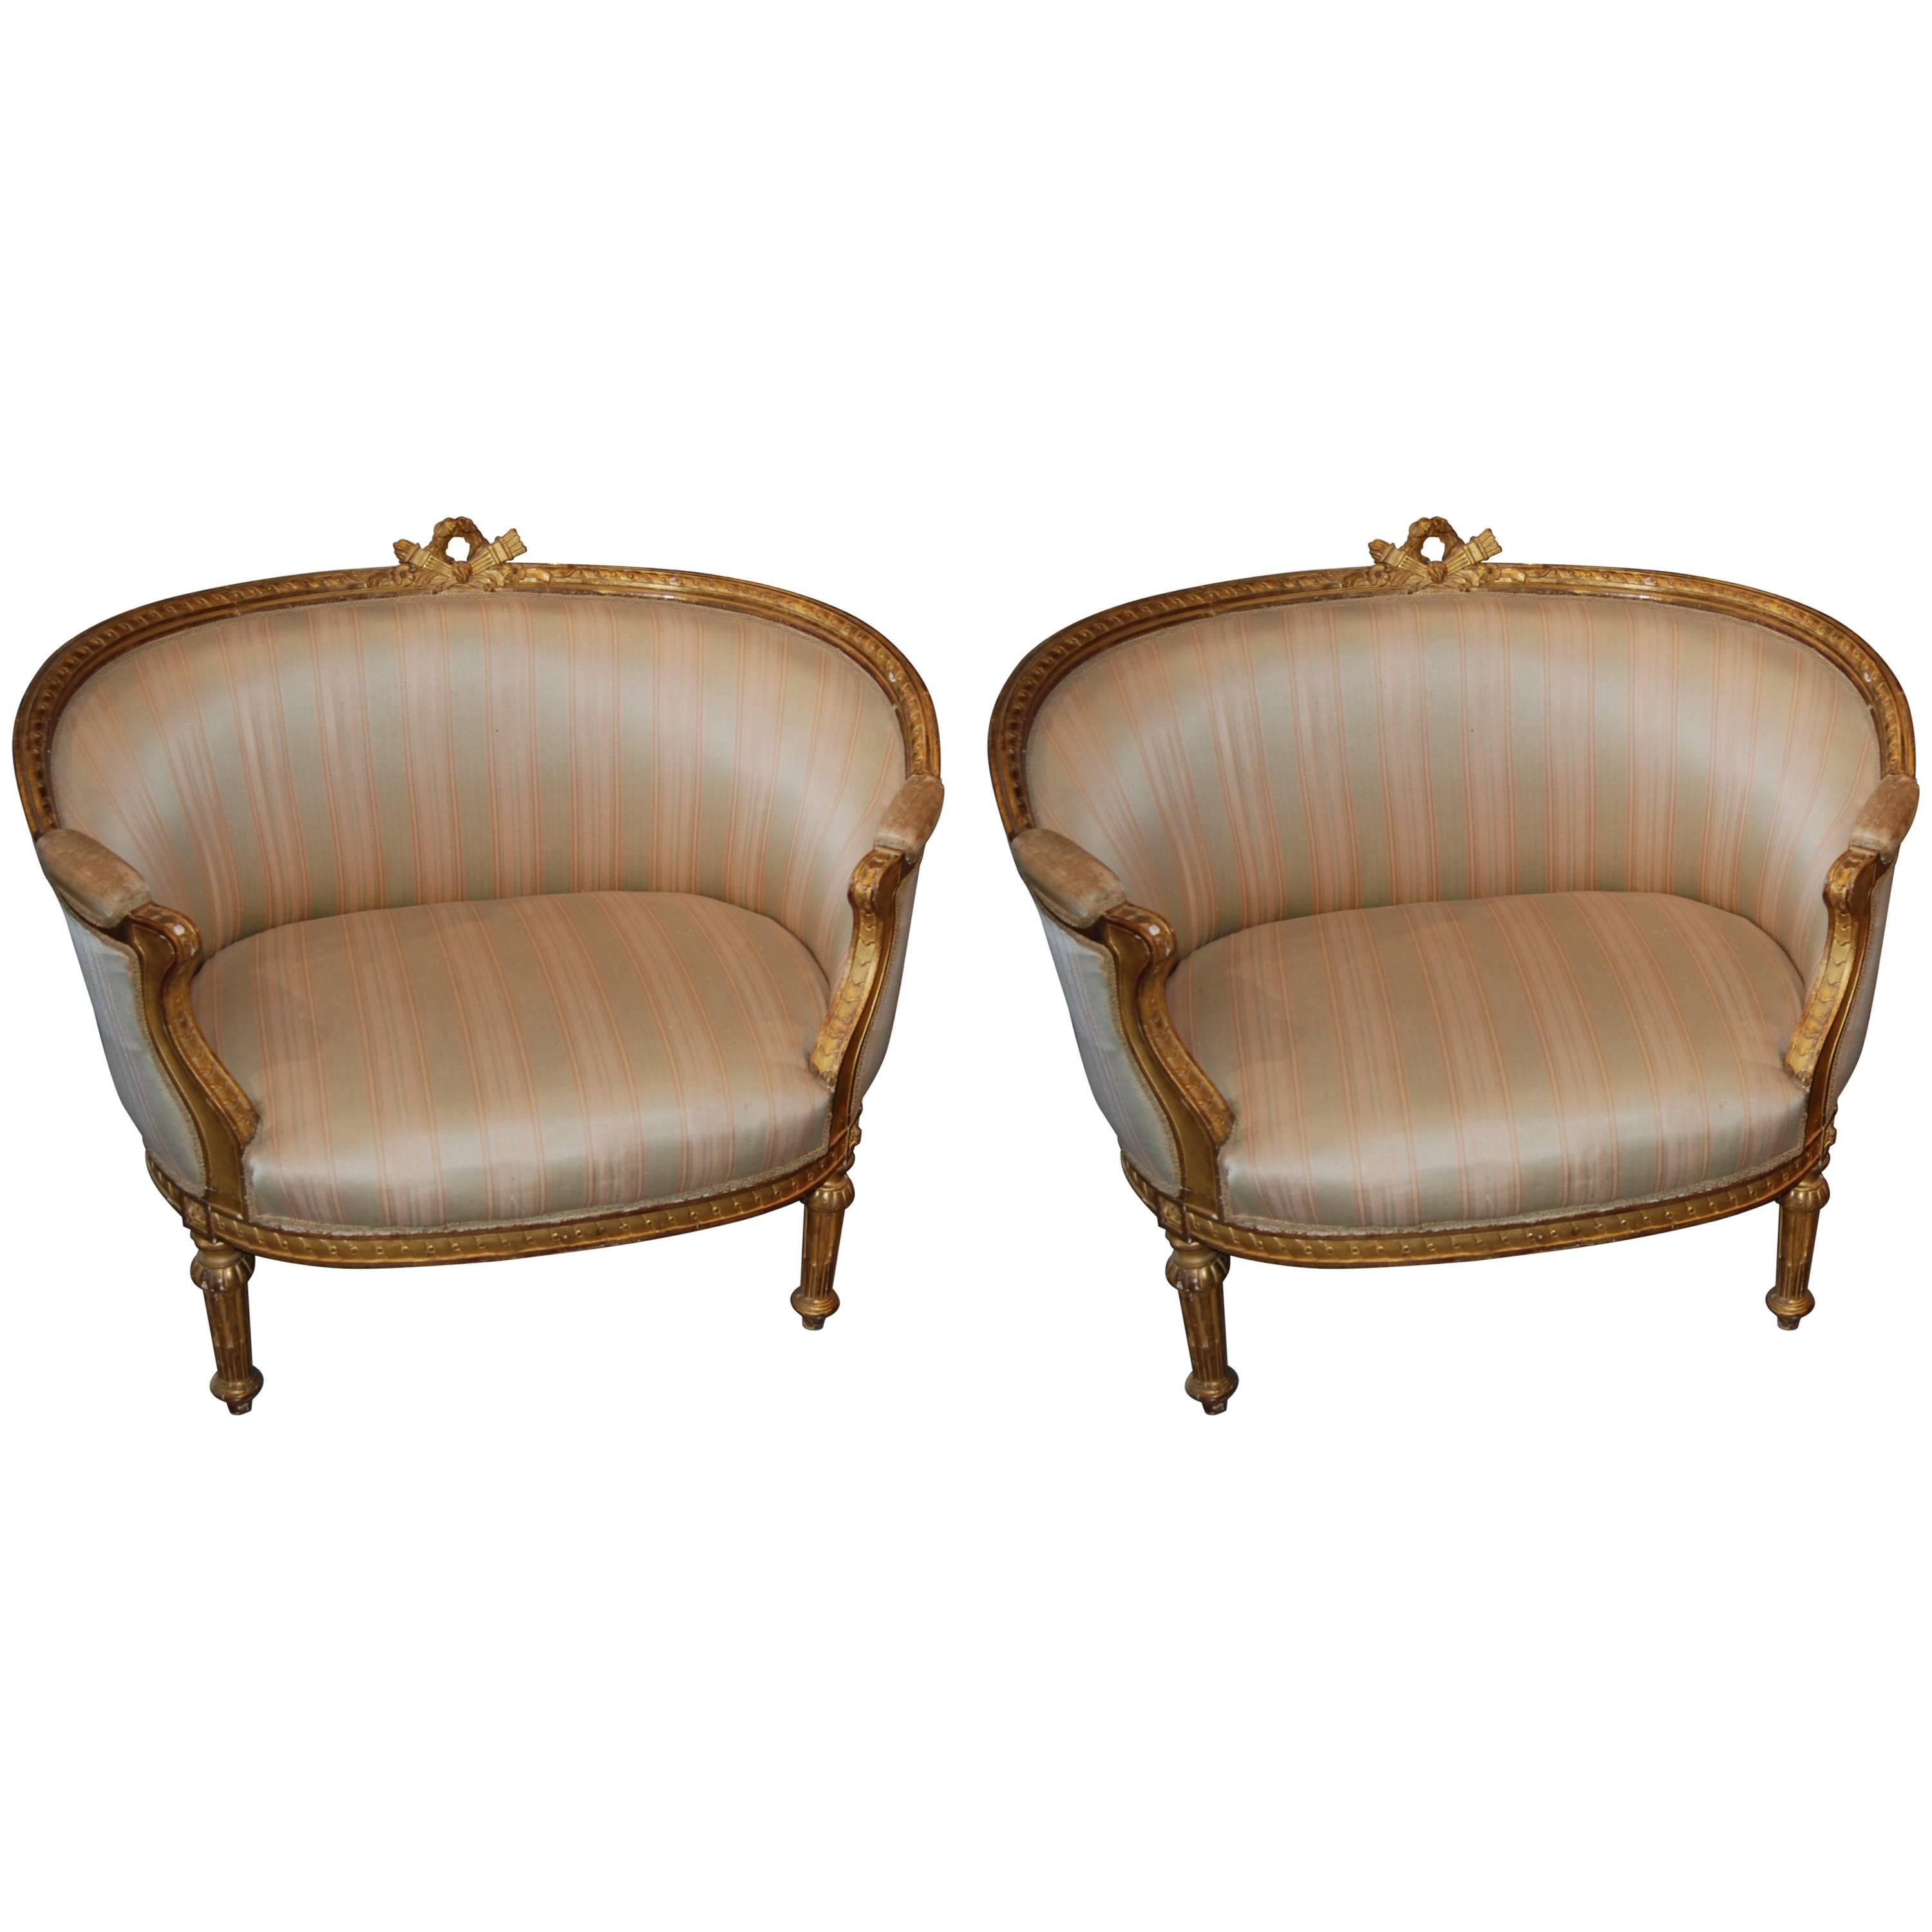 Exceptional Pair of Carved and Gilded Marquis Armchairs For Sale